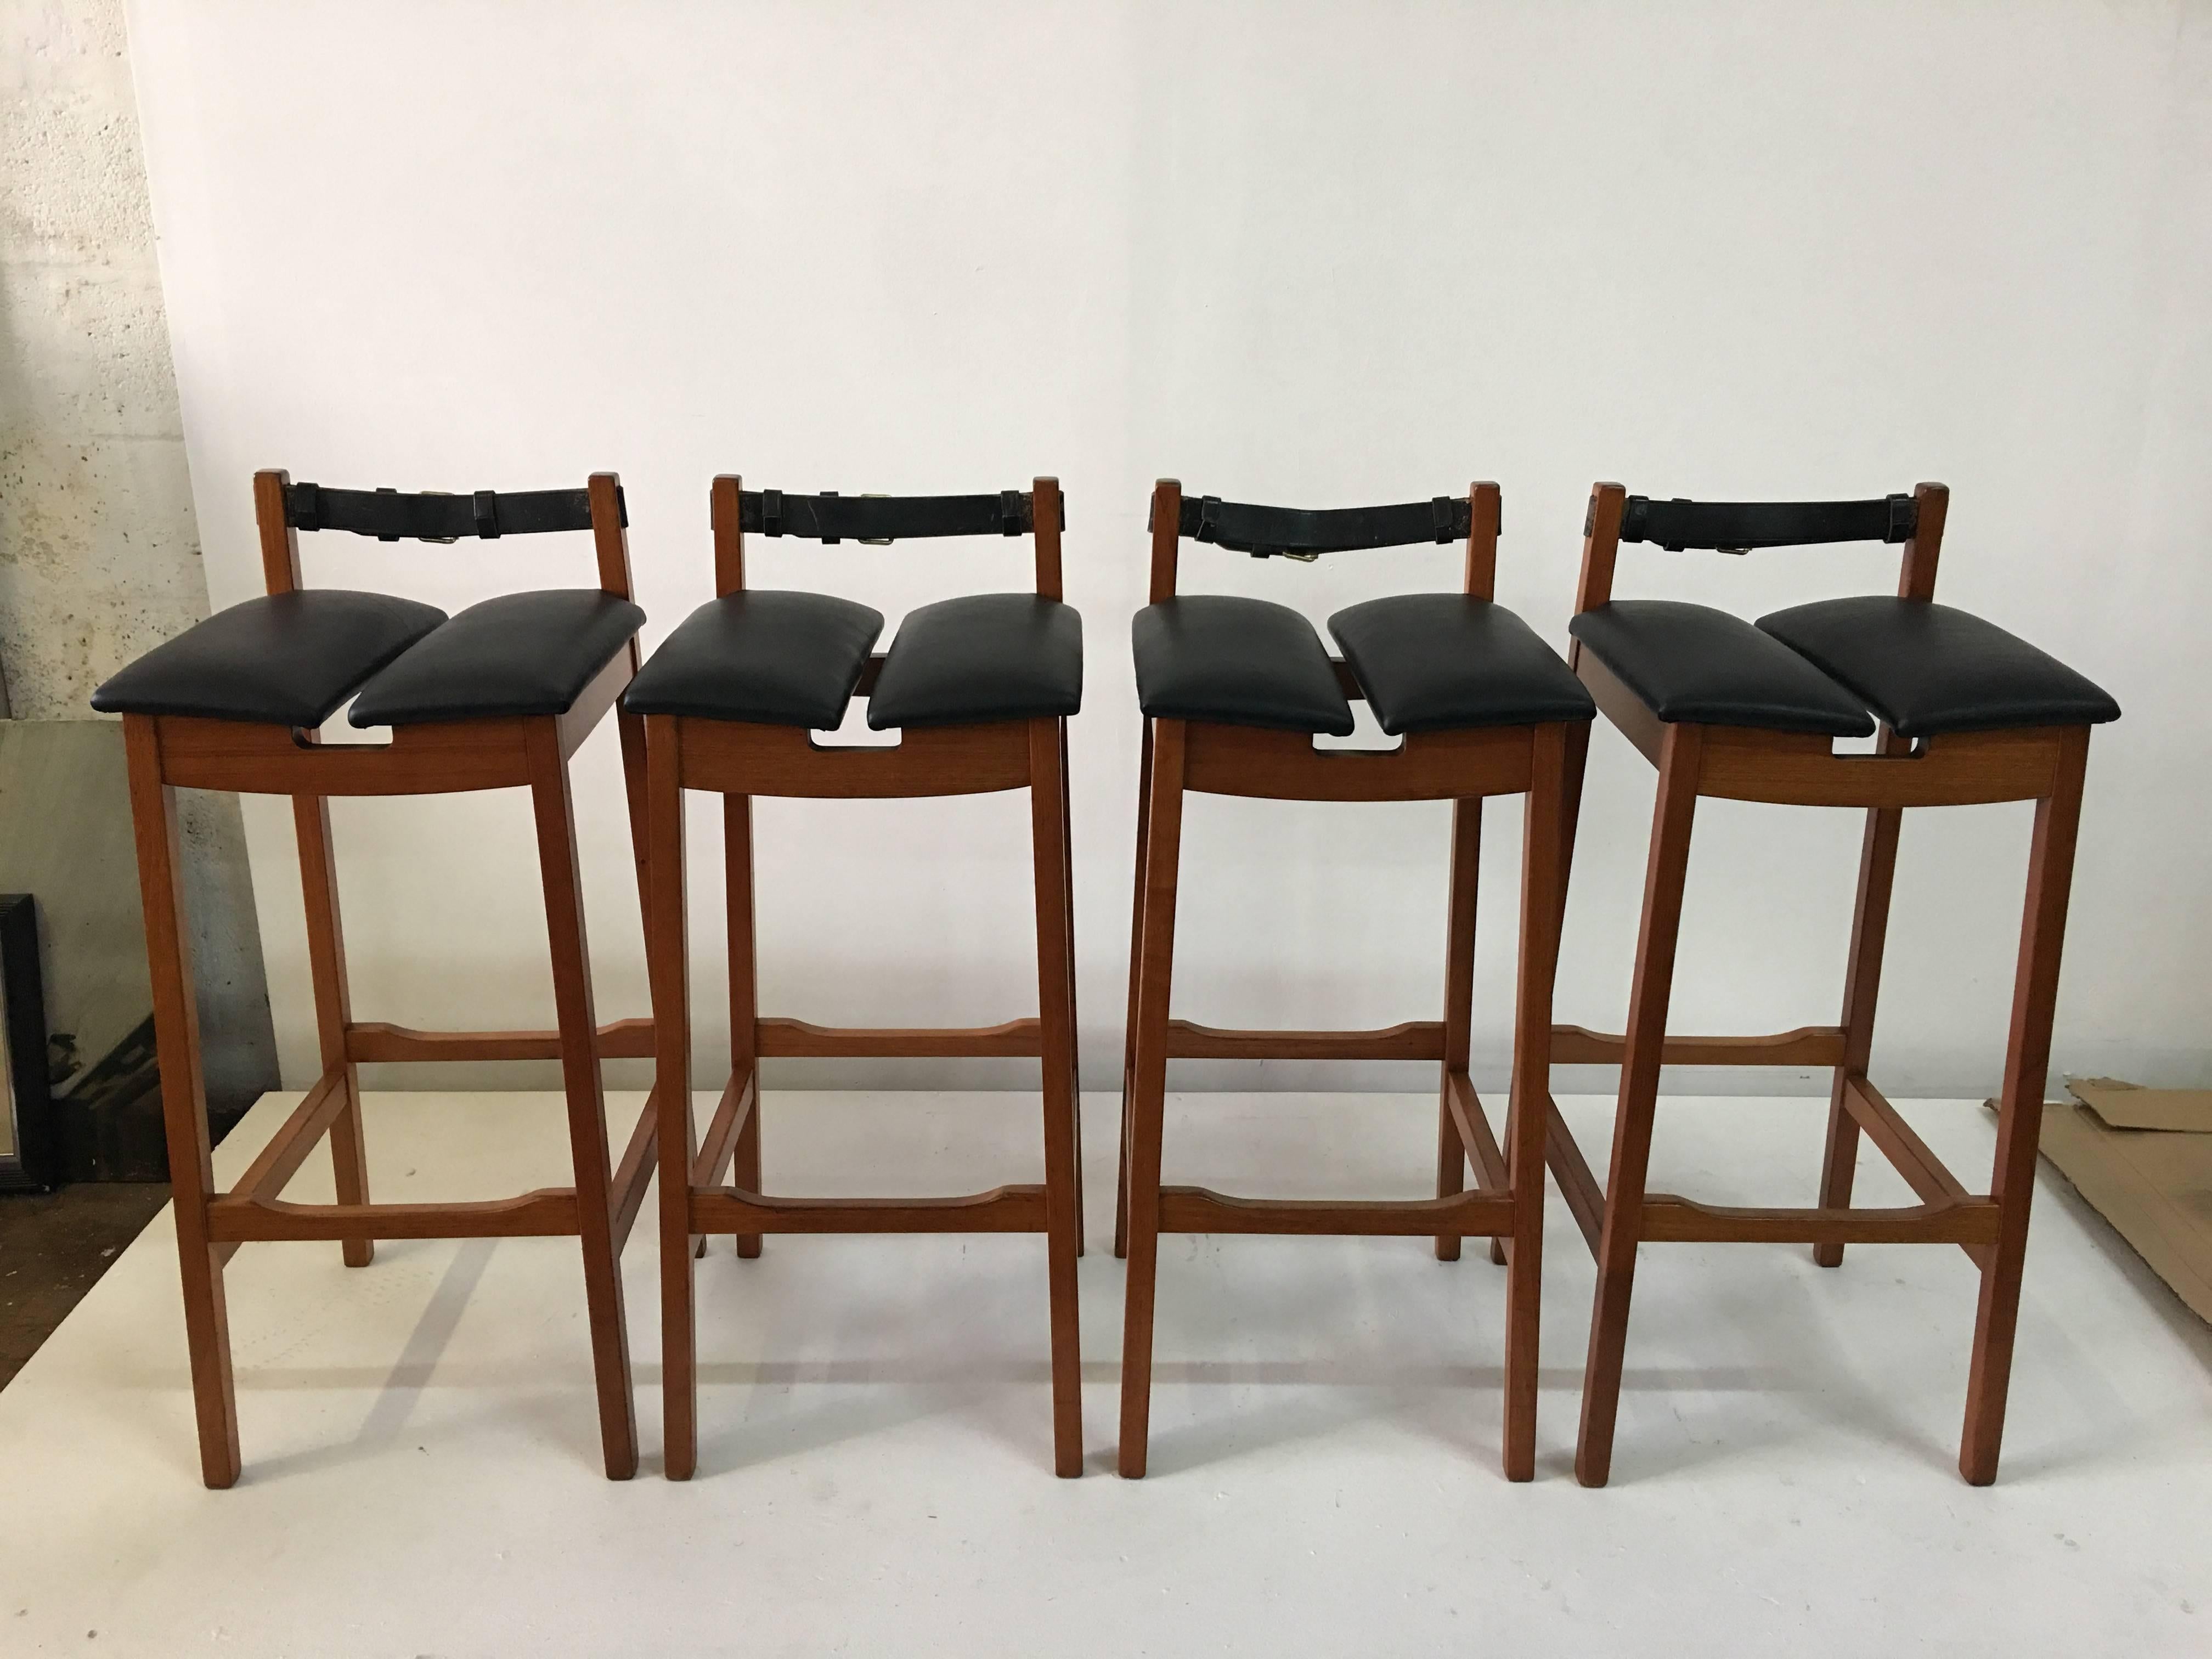 These vintage bar stools feature masculine lines, a black leather worn belt strap as a backrest and newly upholstered black leather hide seats.